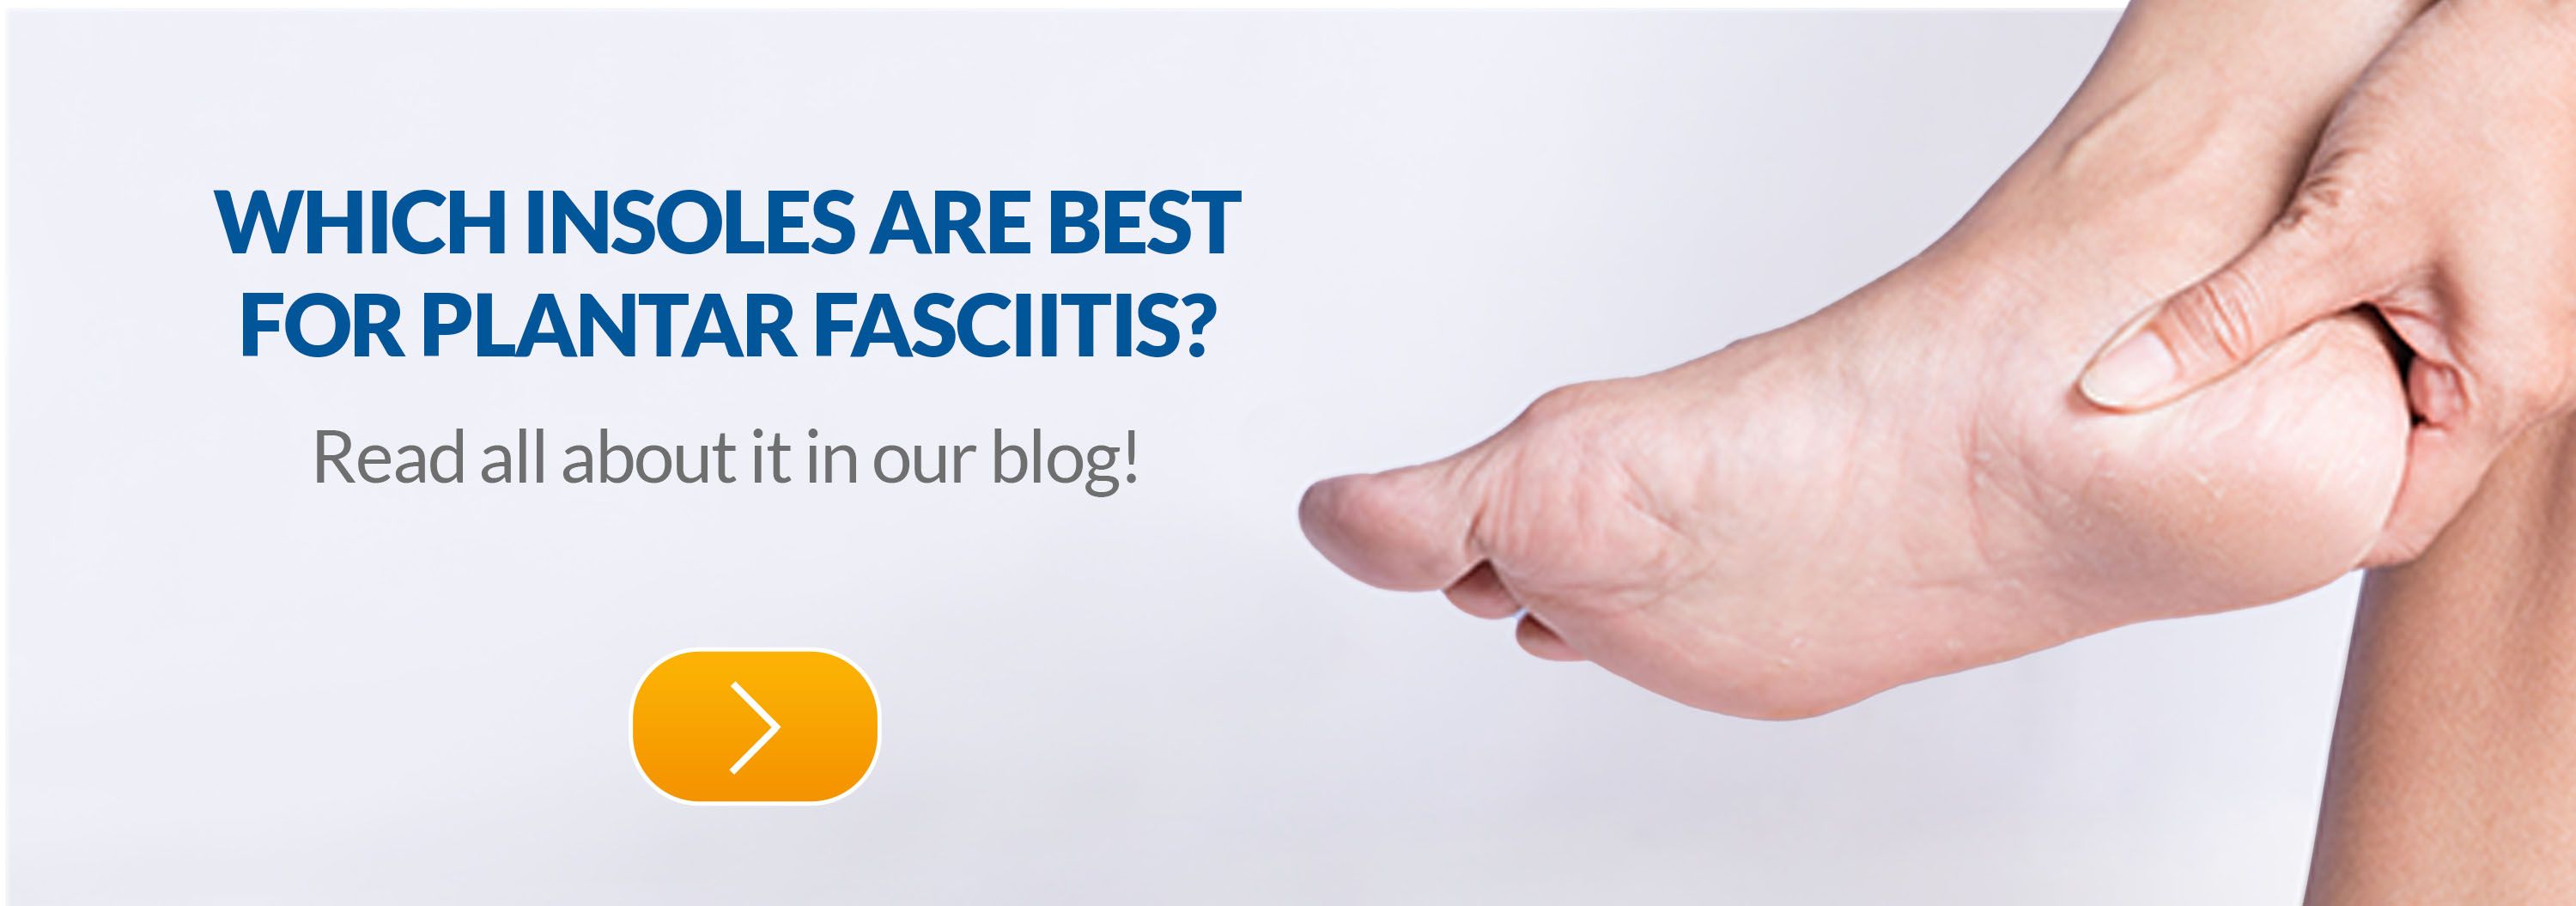 which insoles are best for plantar fasciitis